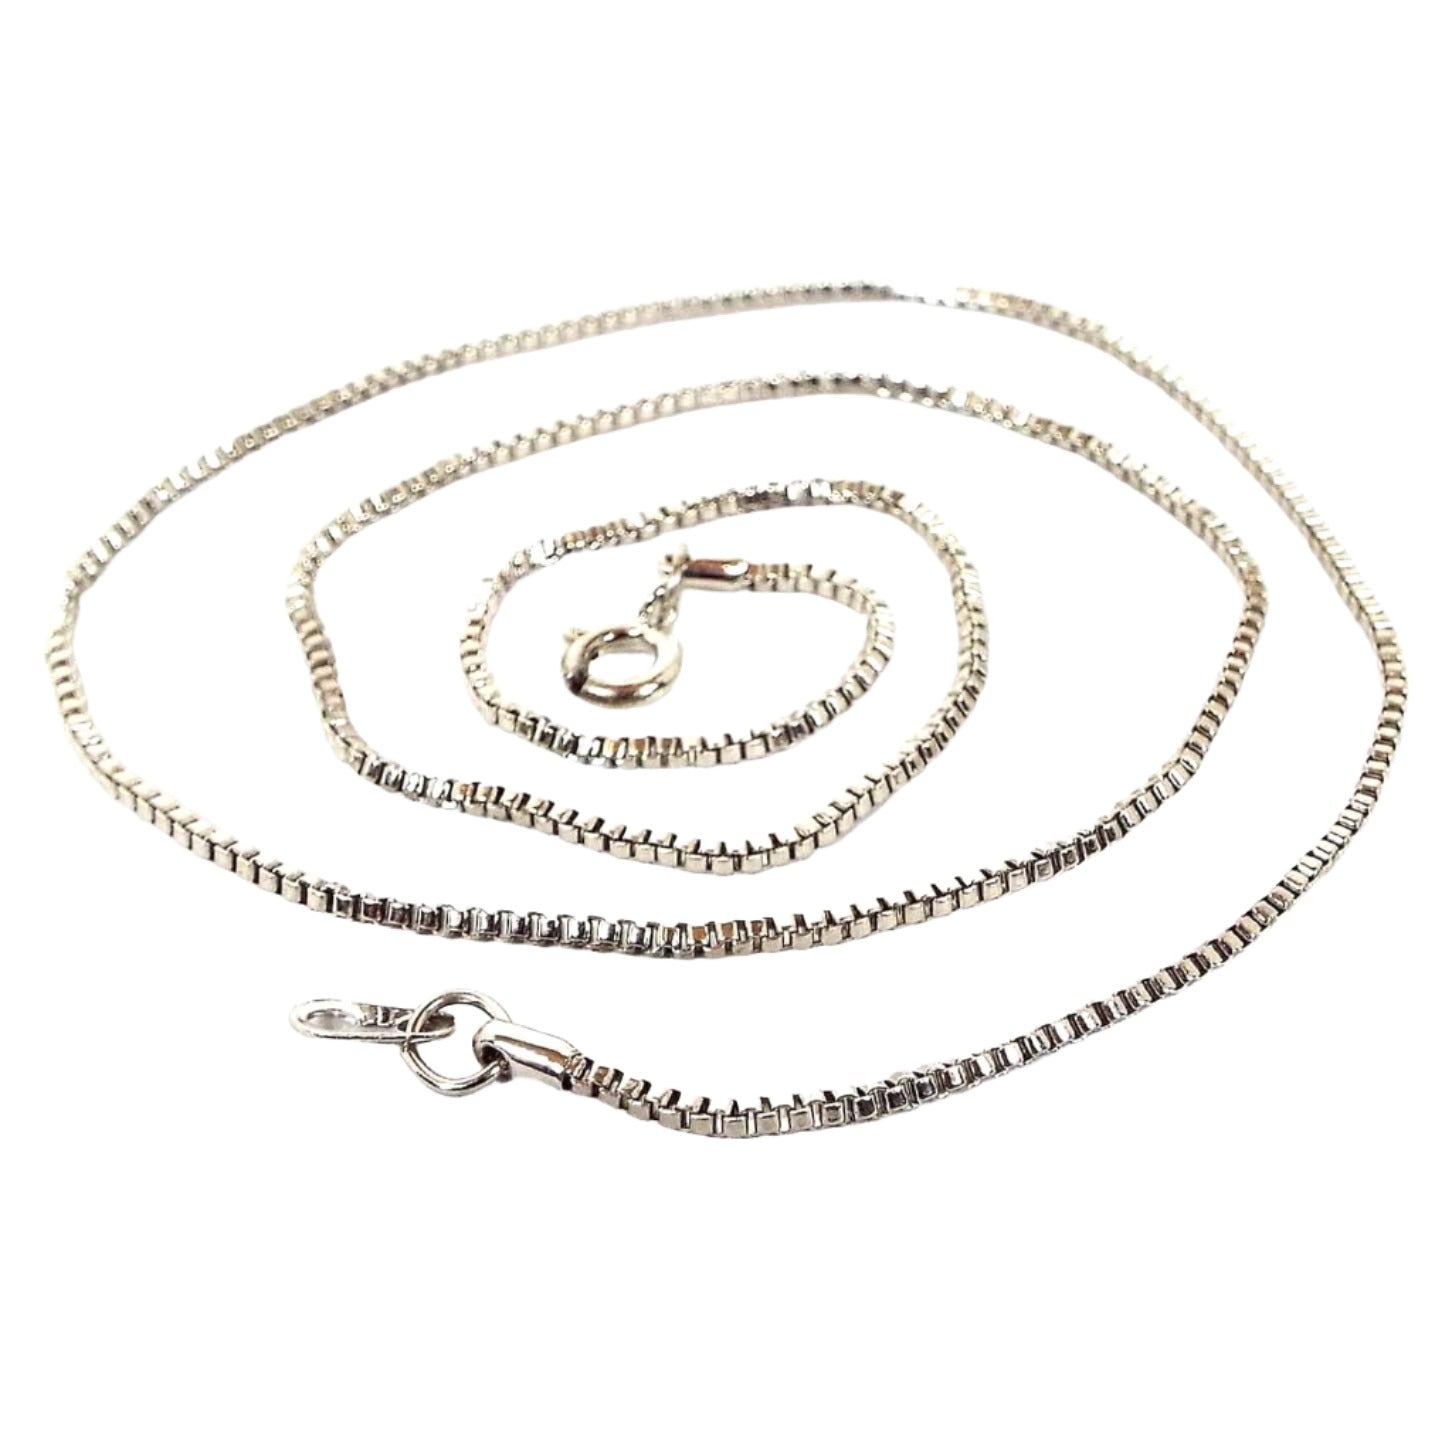 Top view of the retro vintage chain necklace. The metal is silver tone in color. It has a thin box chain link design with a round spring ring clasp on the end.